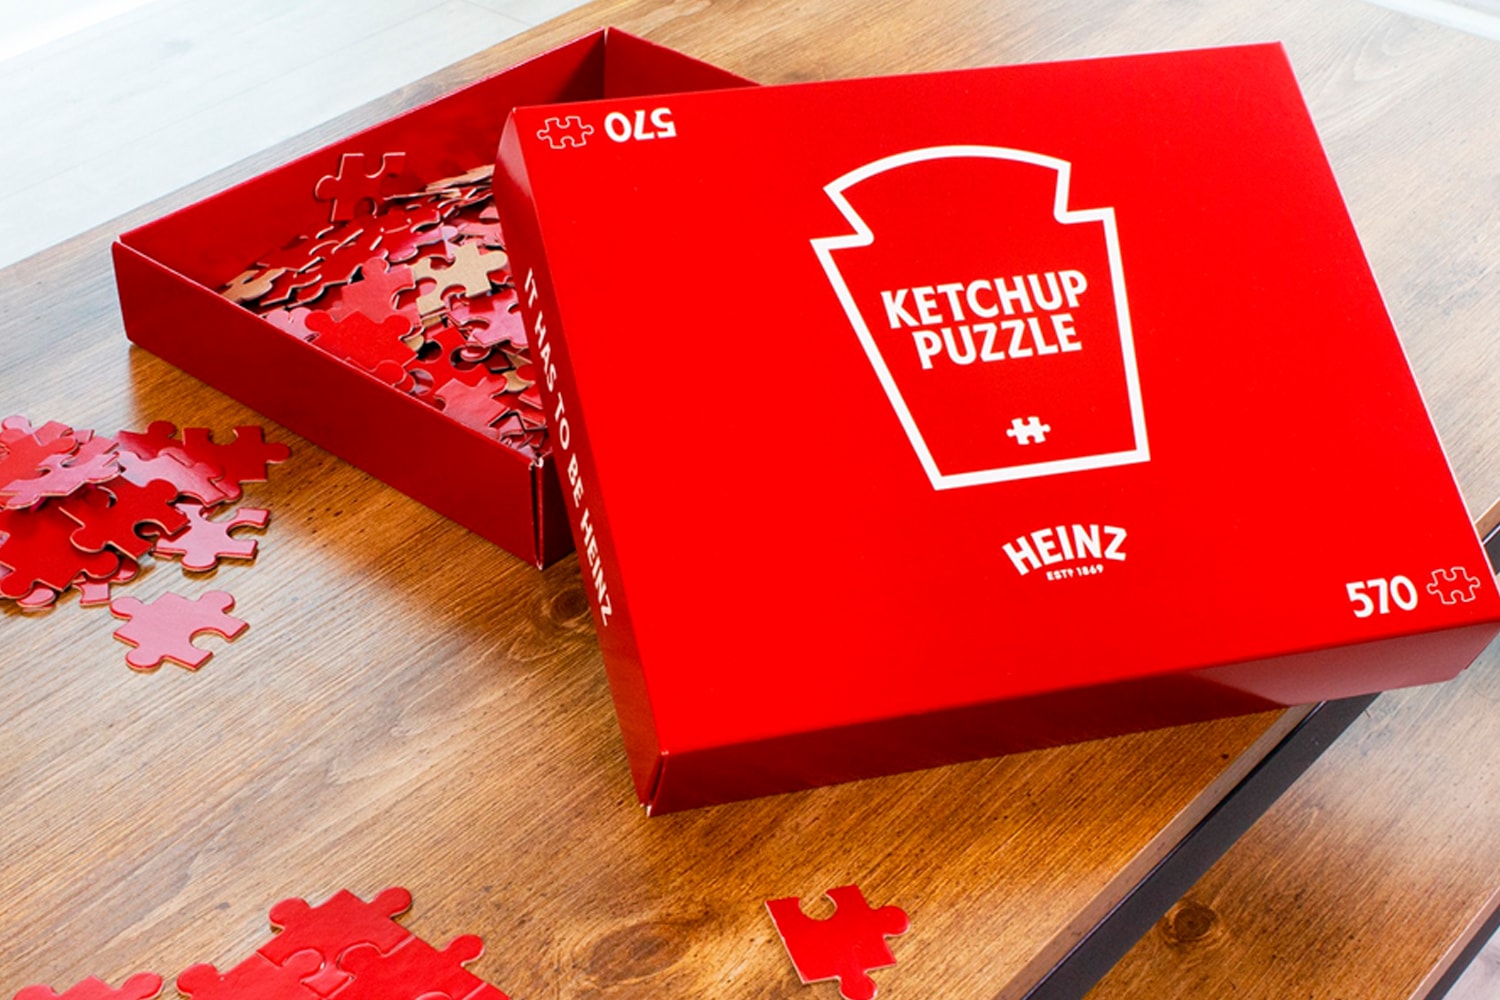 Heinz Ketchup Red Puzzle Contest Announcement info 570 piece